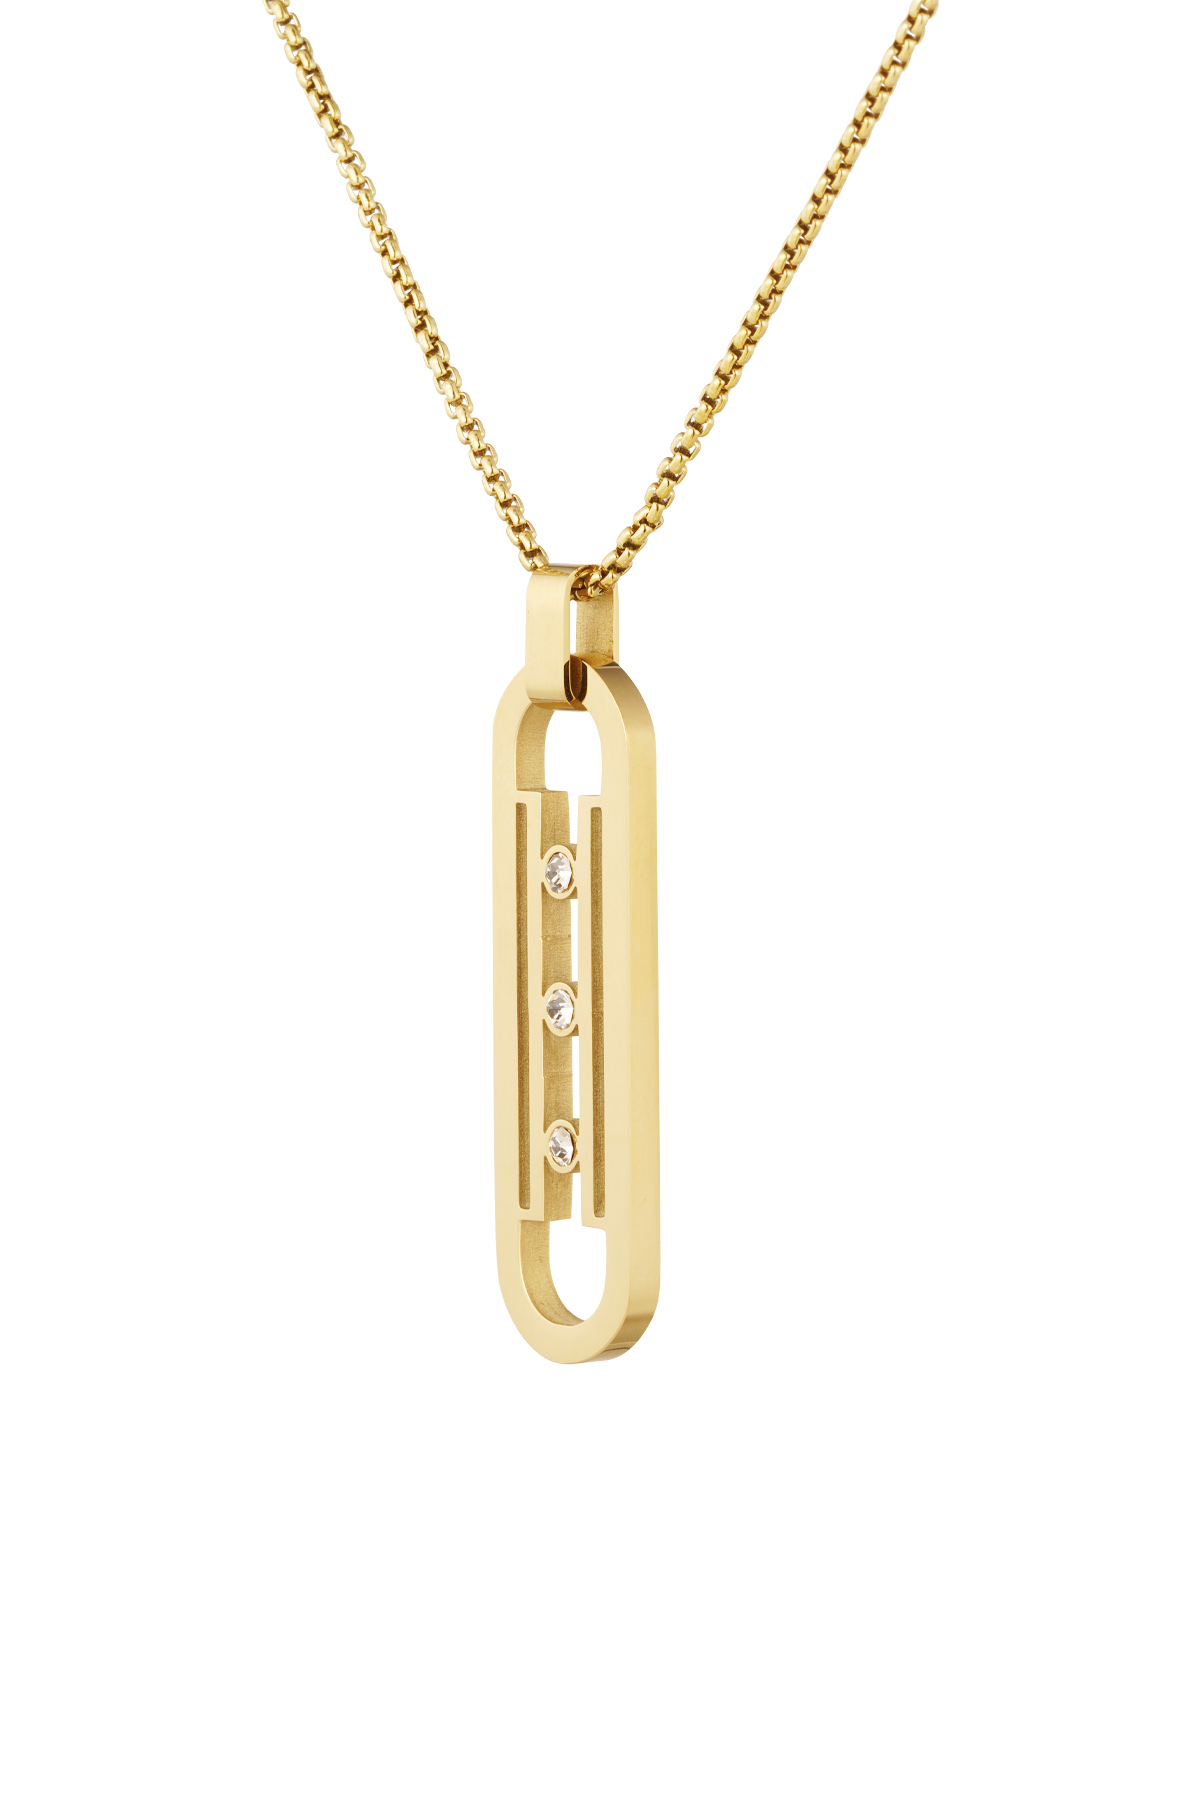 Necklace link stones - gold h5 Picture5